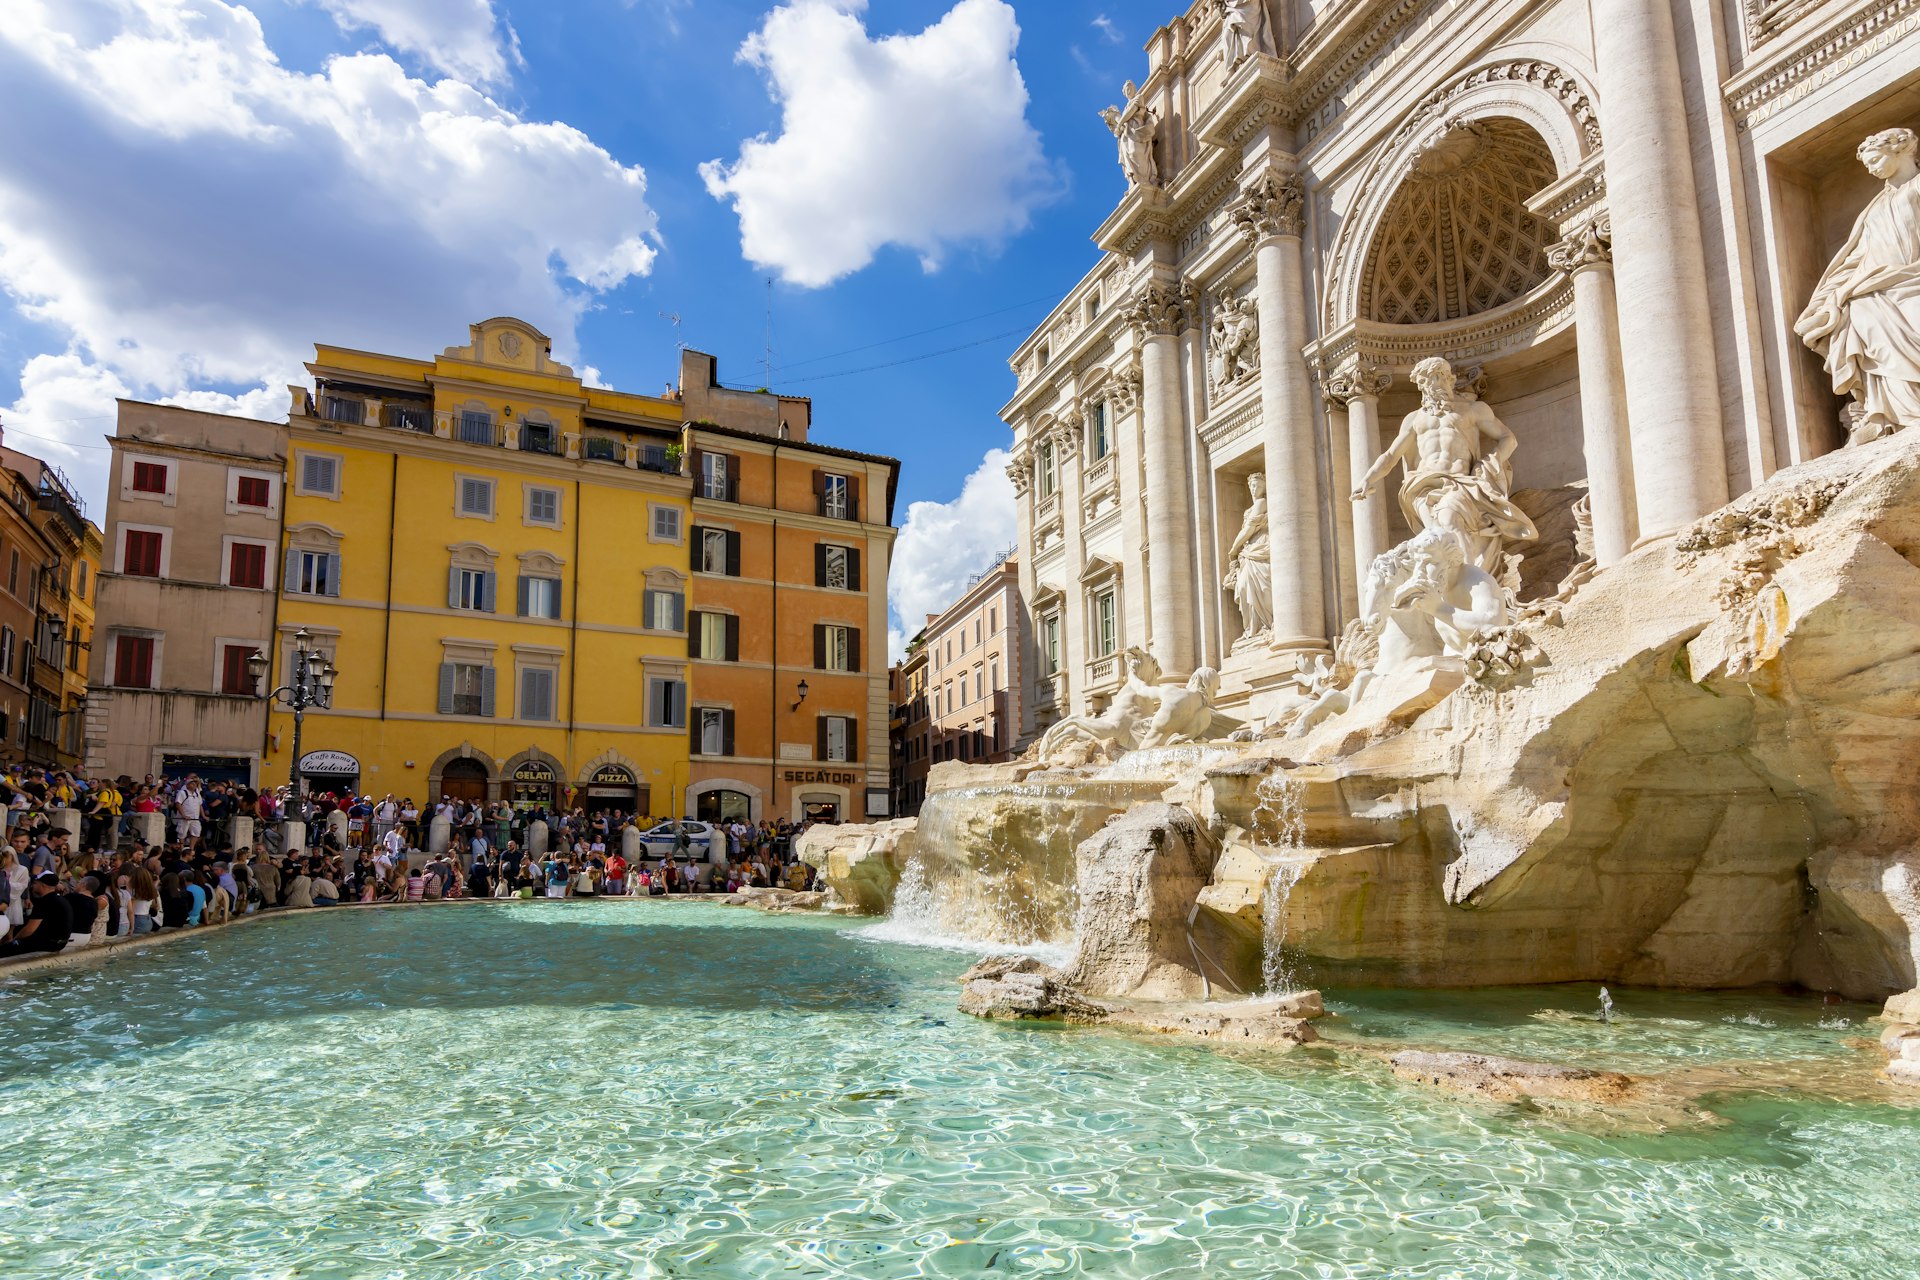 A morning view of the Trevi Fountain, Rome, Italy